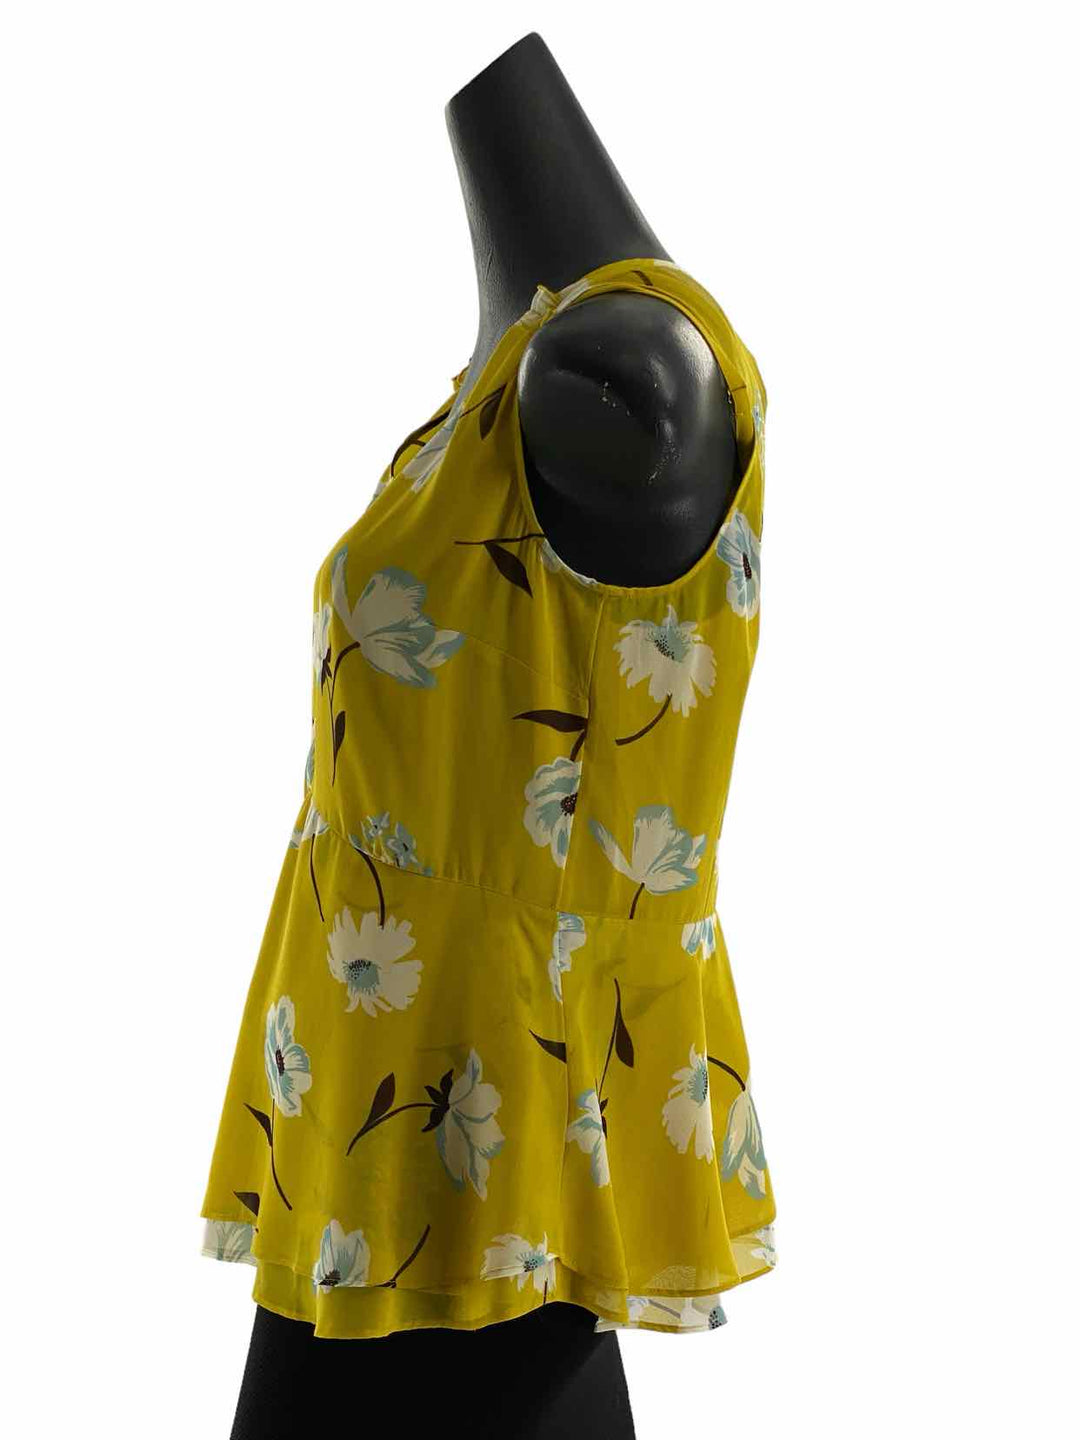 Cabi Size S Yellow Flowers Tank Top